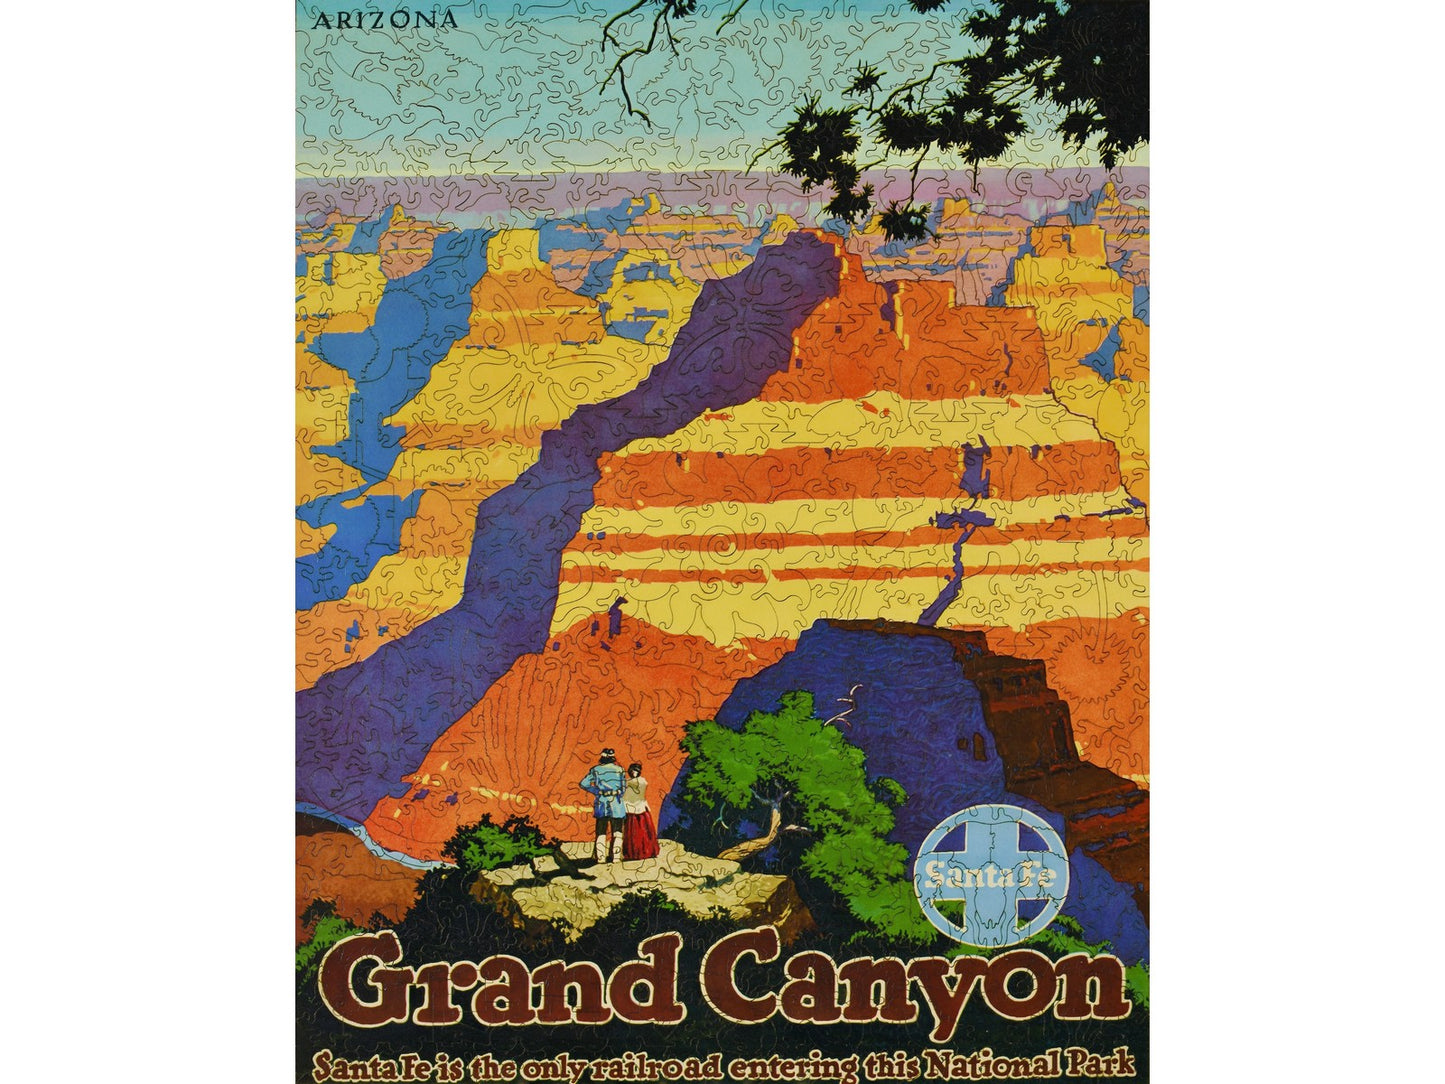 The front of the puzzle, Grand Canyon Santa Fe Railroad.